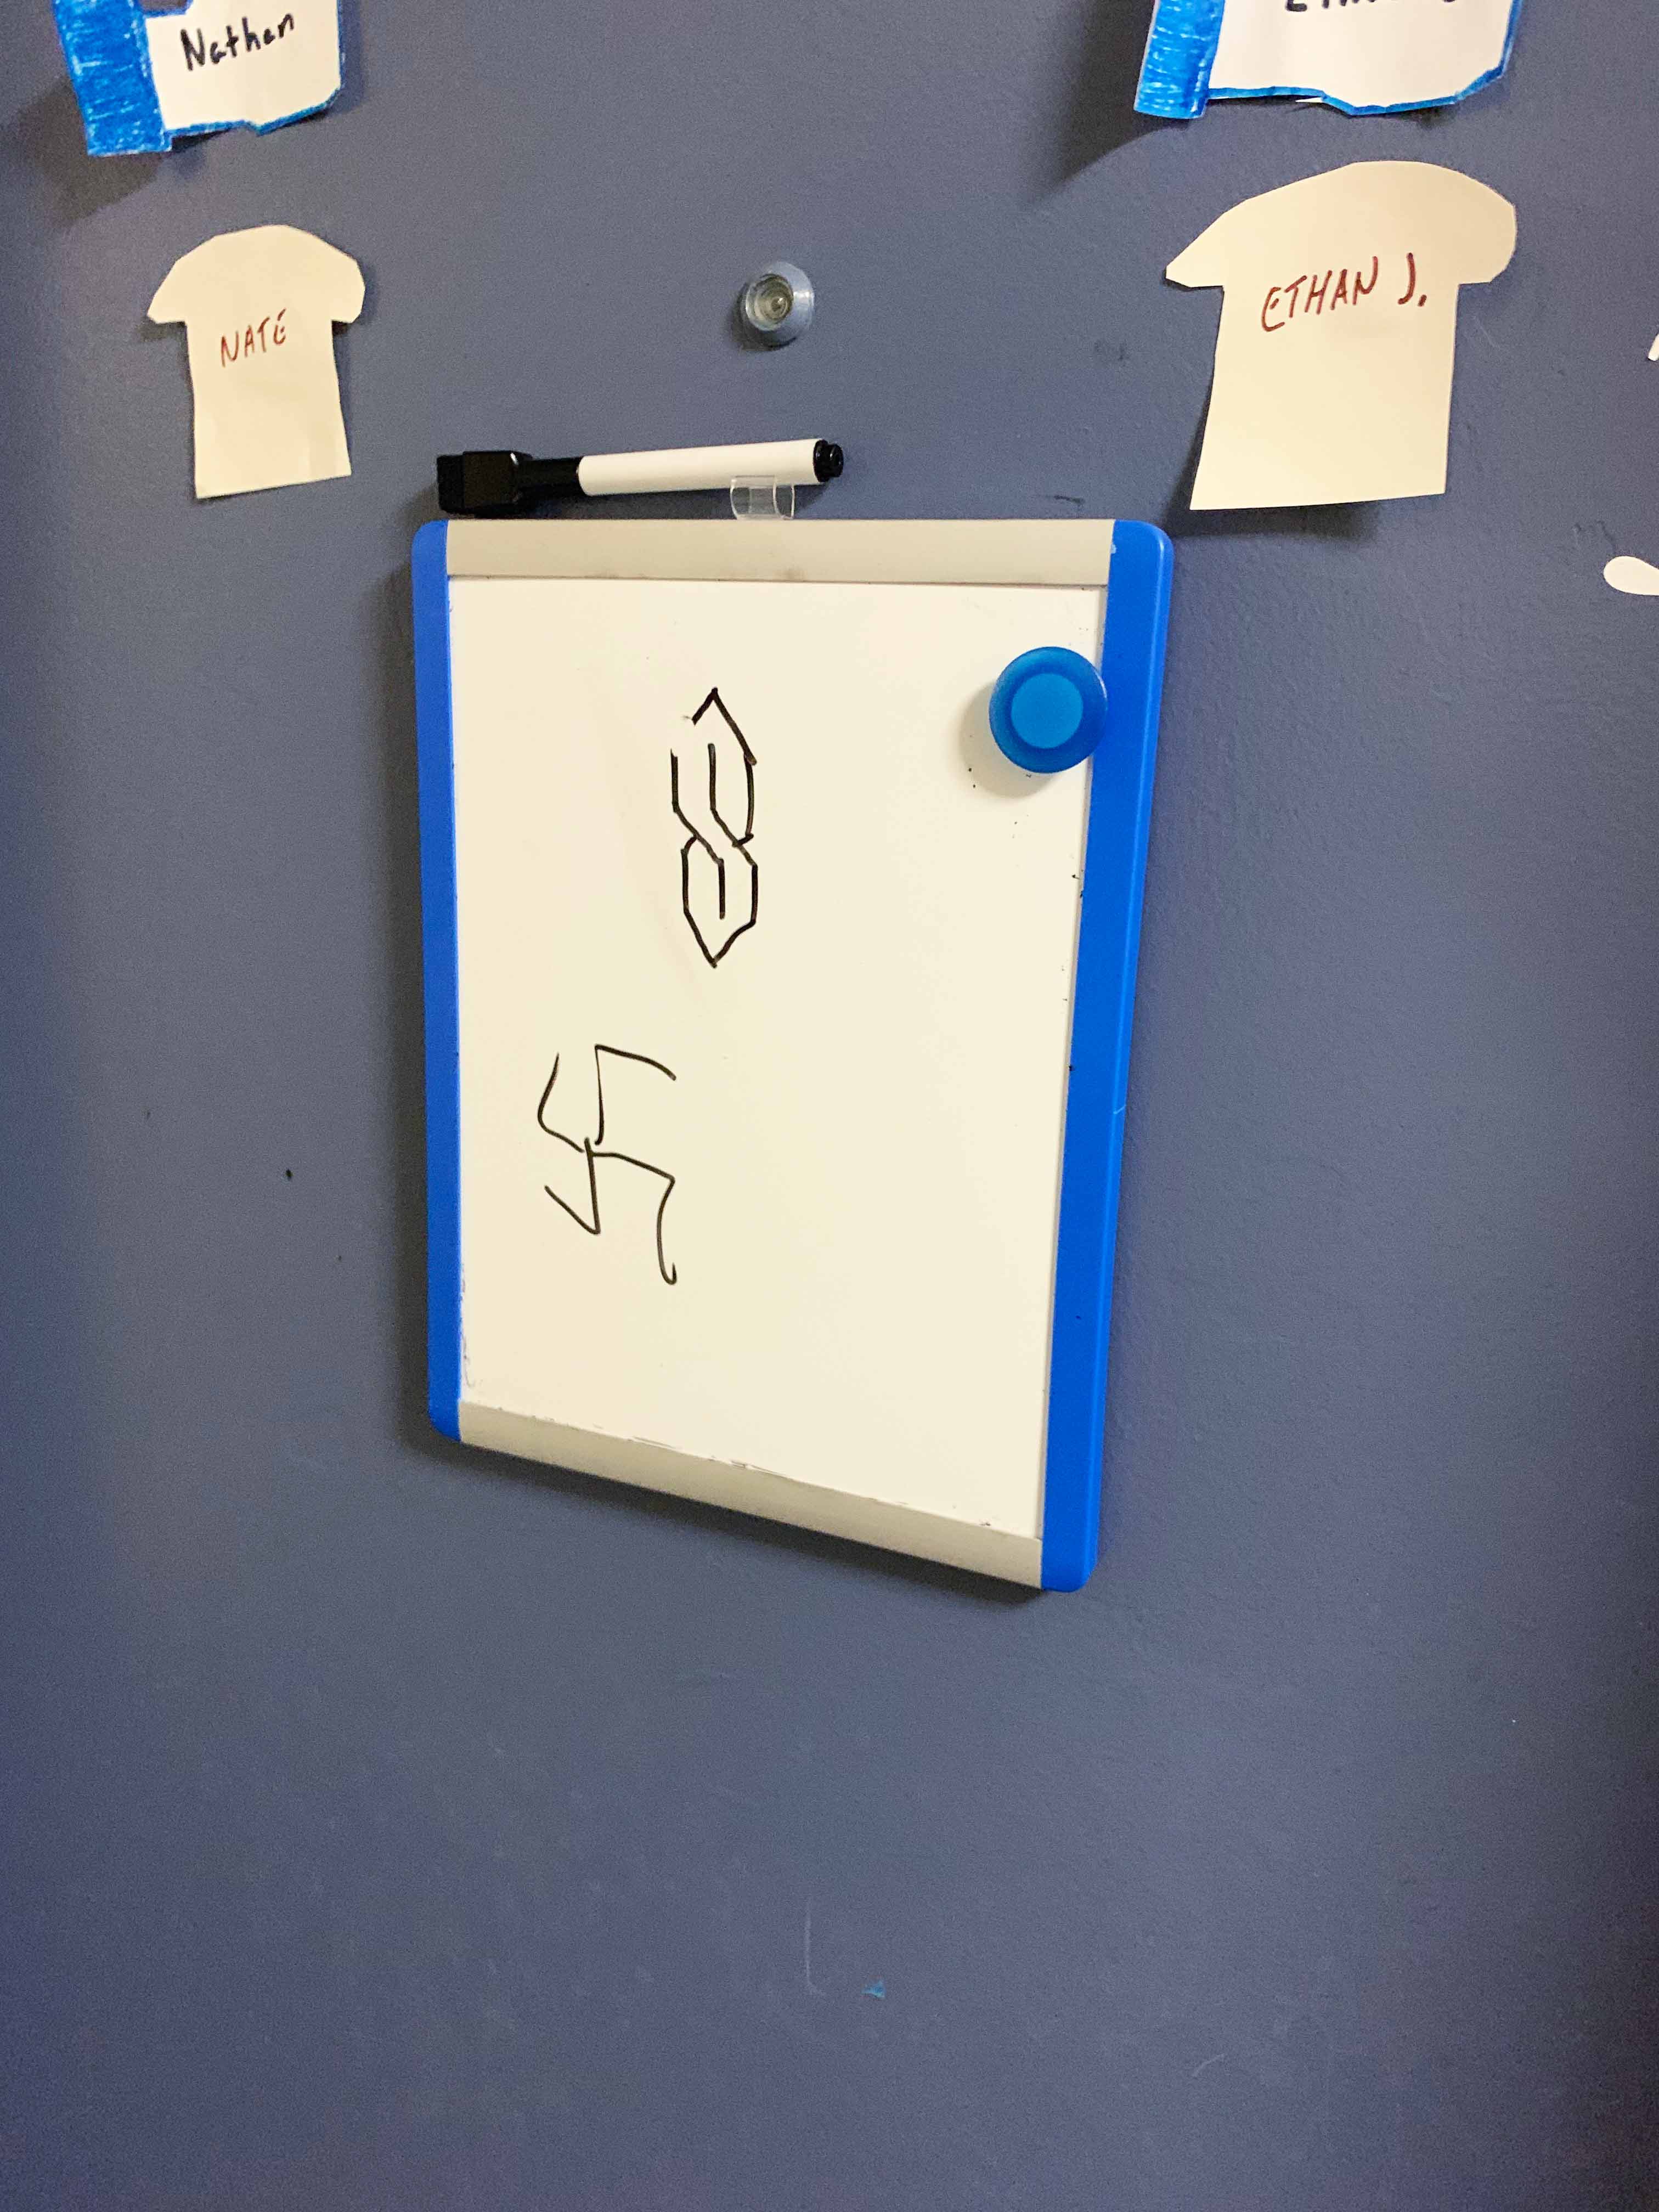 Swastika reportedly drawn outside dorm room in Tallcott Hall – THE ITHACAN